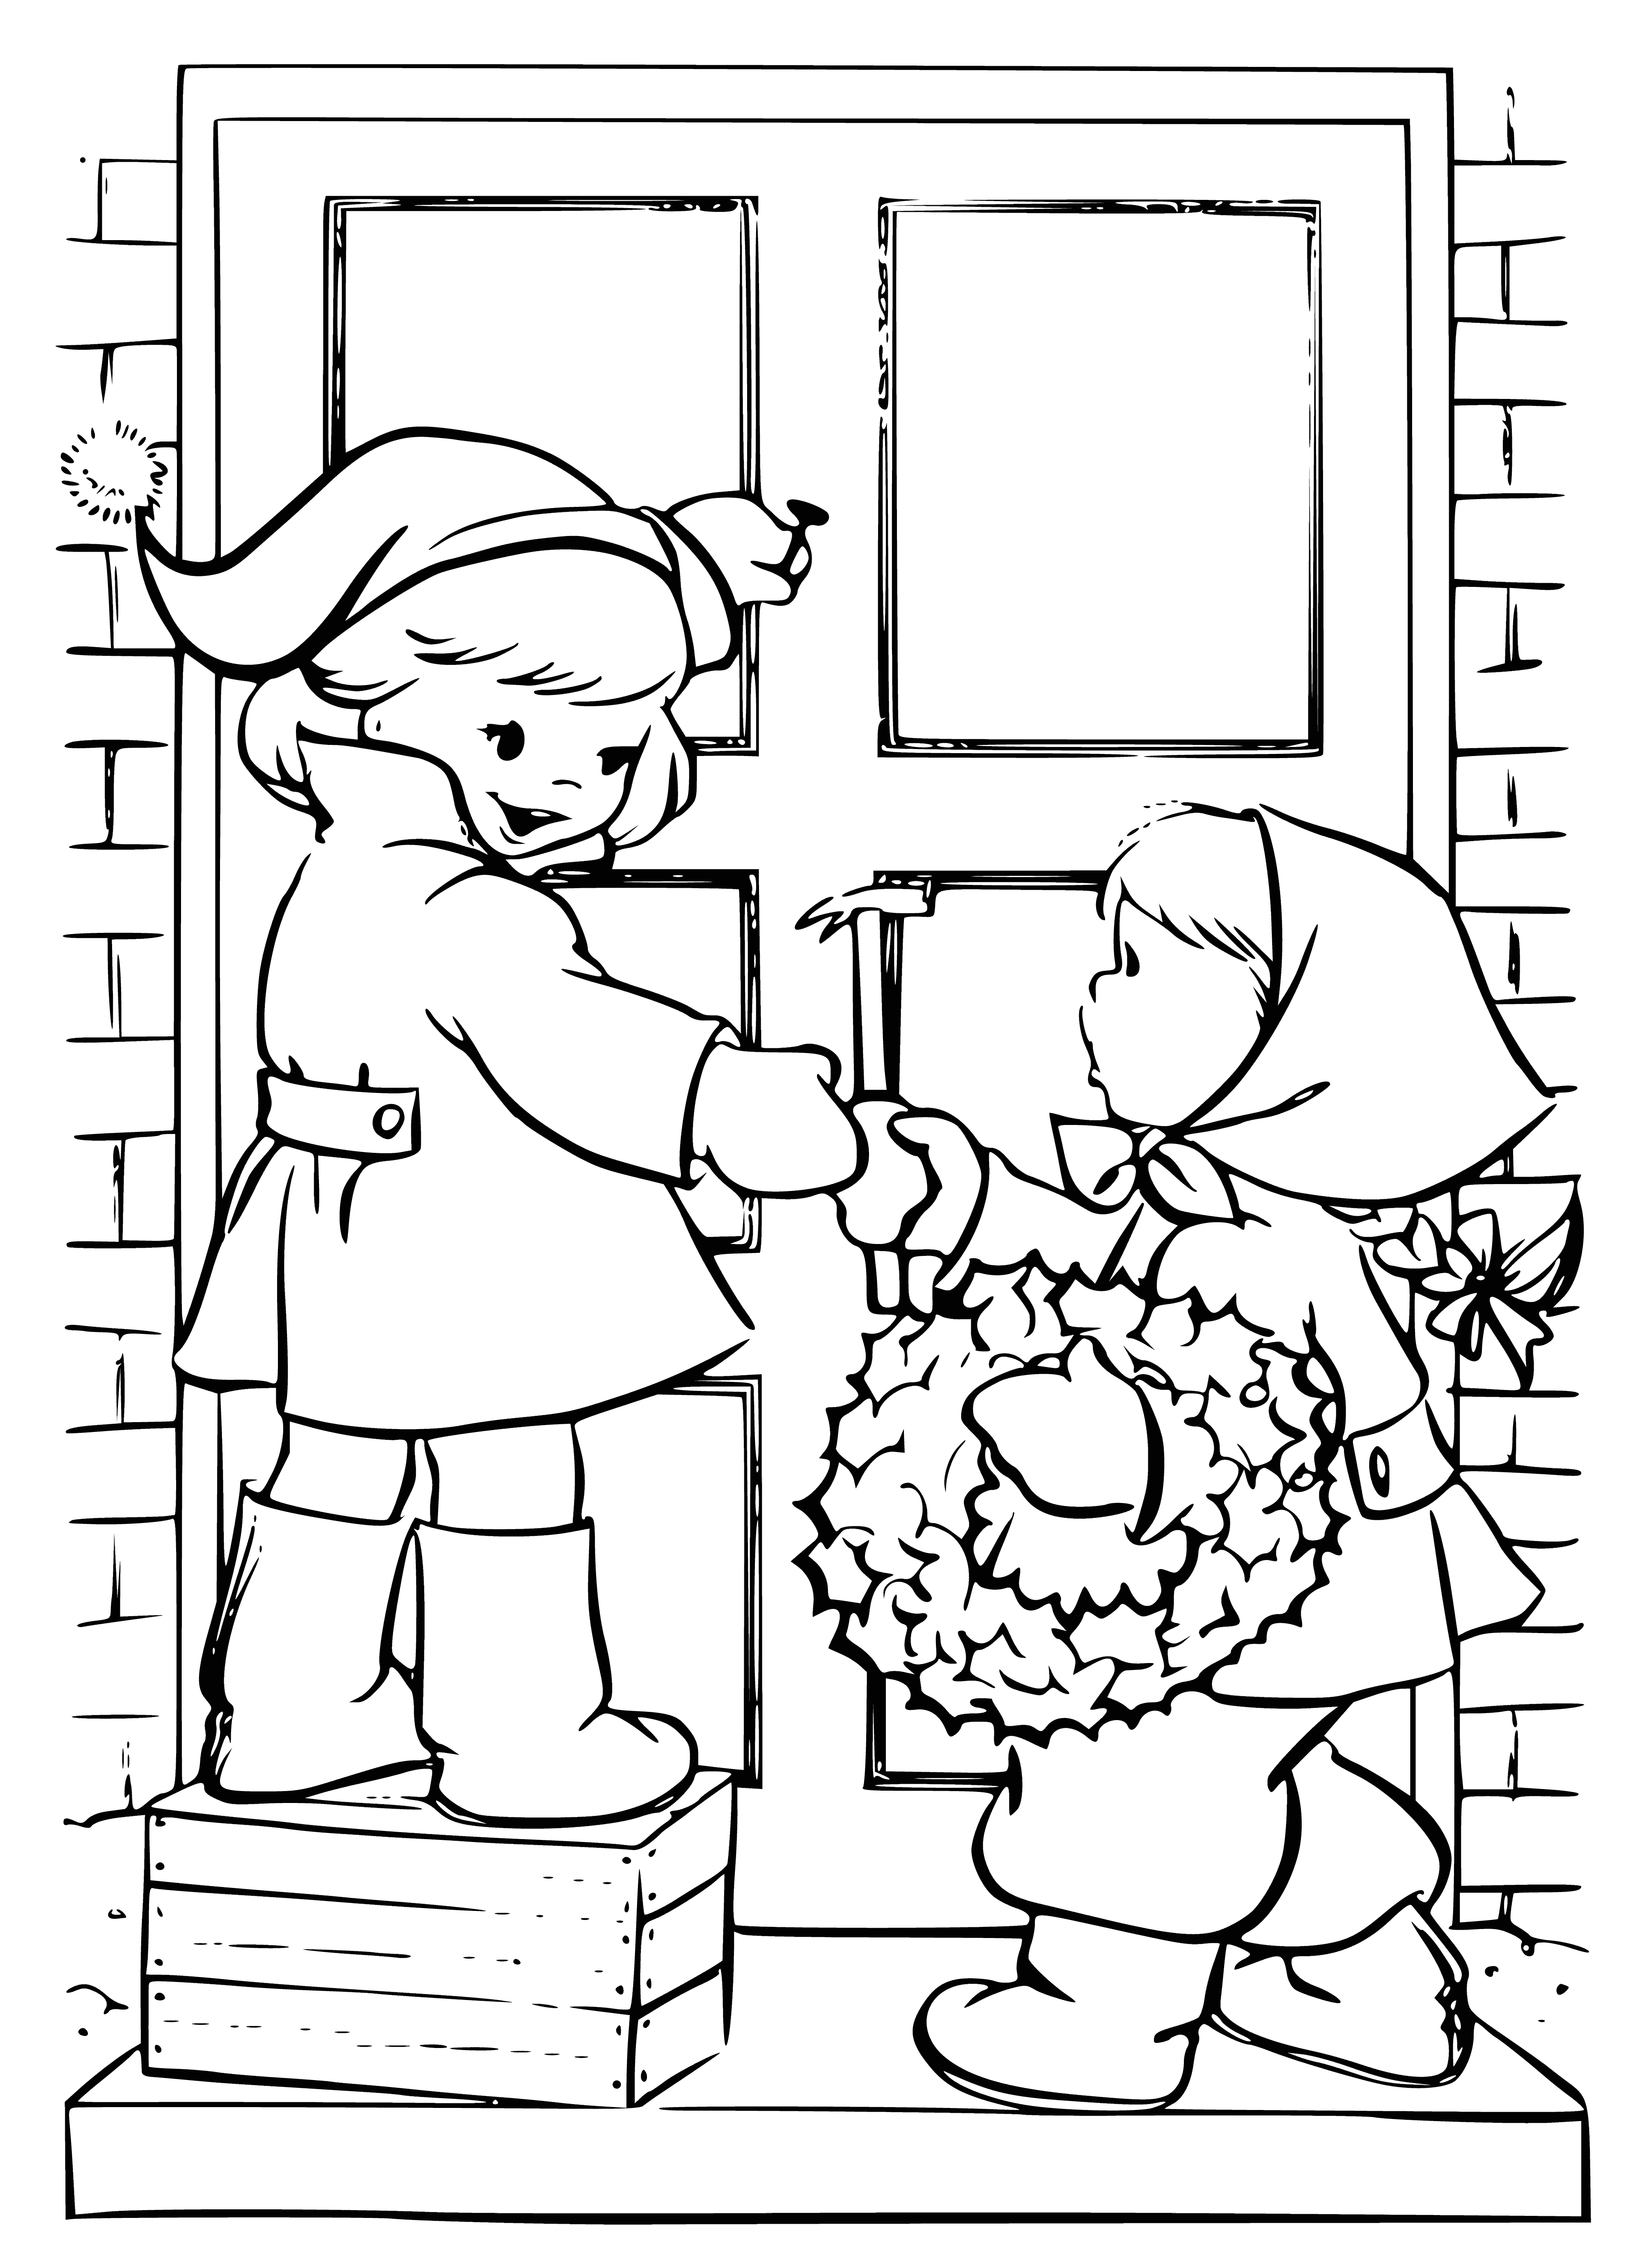 Children hang a Christmas wreath w/ green leaves, red berries & pinecones. They stand on ladder to decorate. #Christmas #Coloring